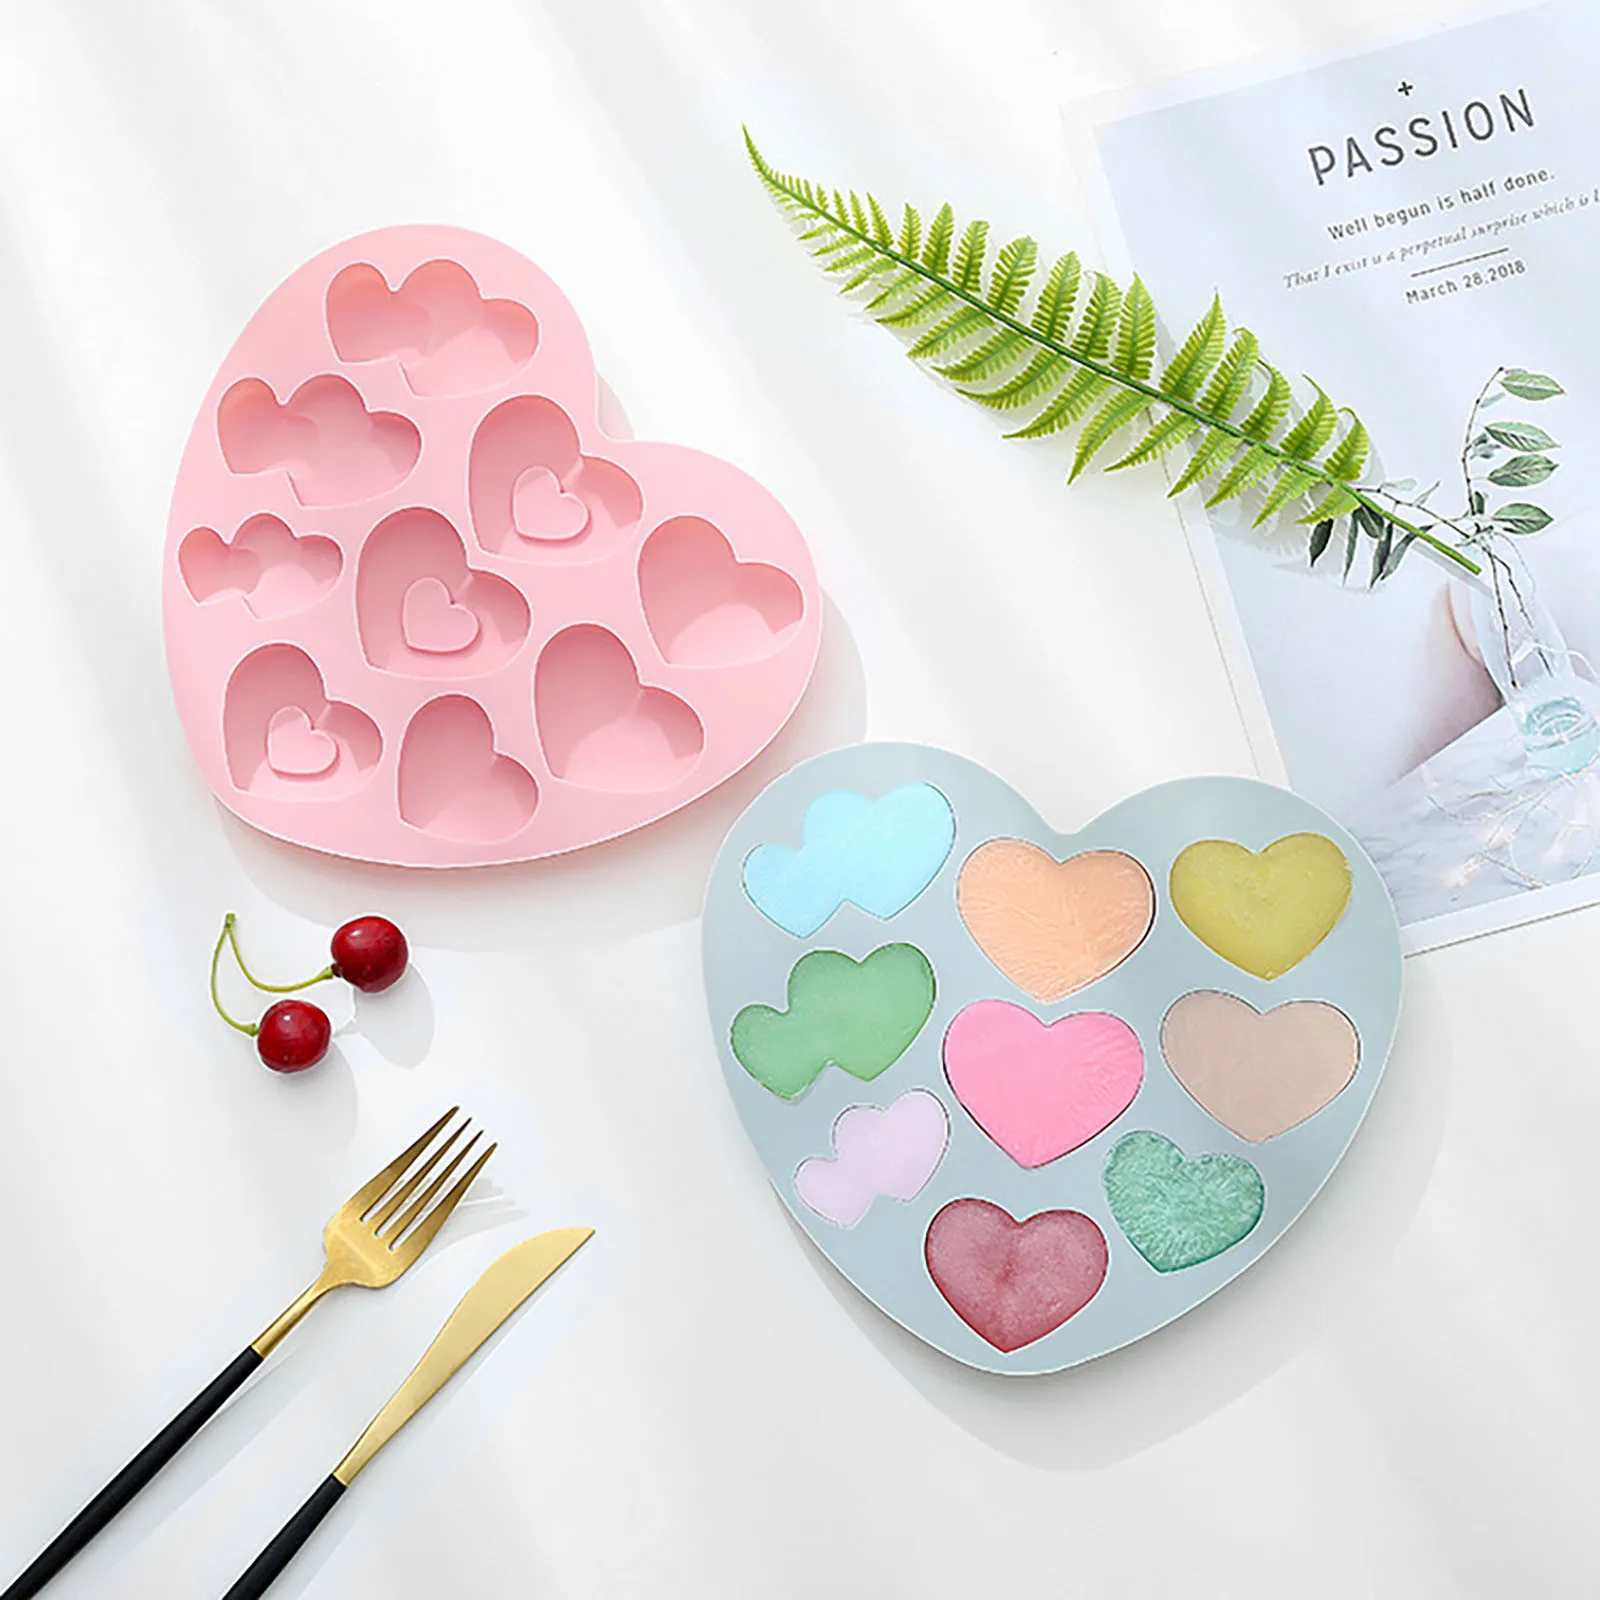 

Love Cake Mold Silicone Heart Chocolate Mold Sugar Cake Mold Bake Tool Kitchen Cool Non-edible For Home Form For Soap Mousse#751